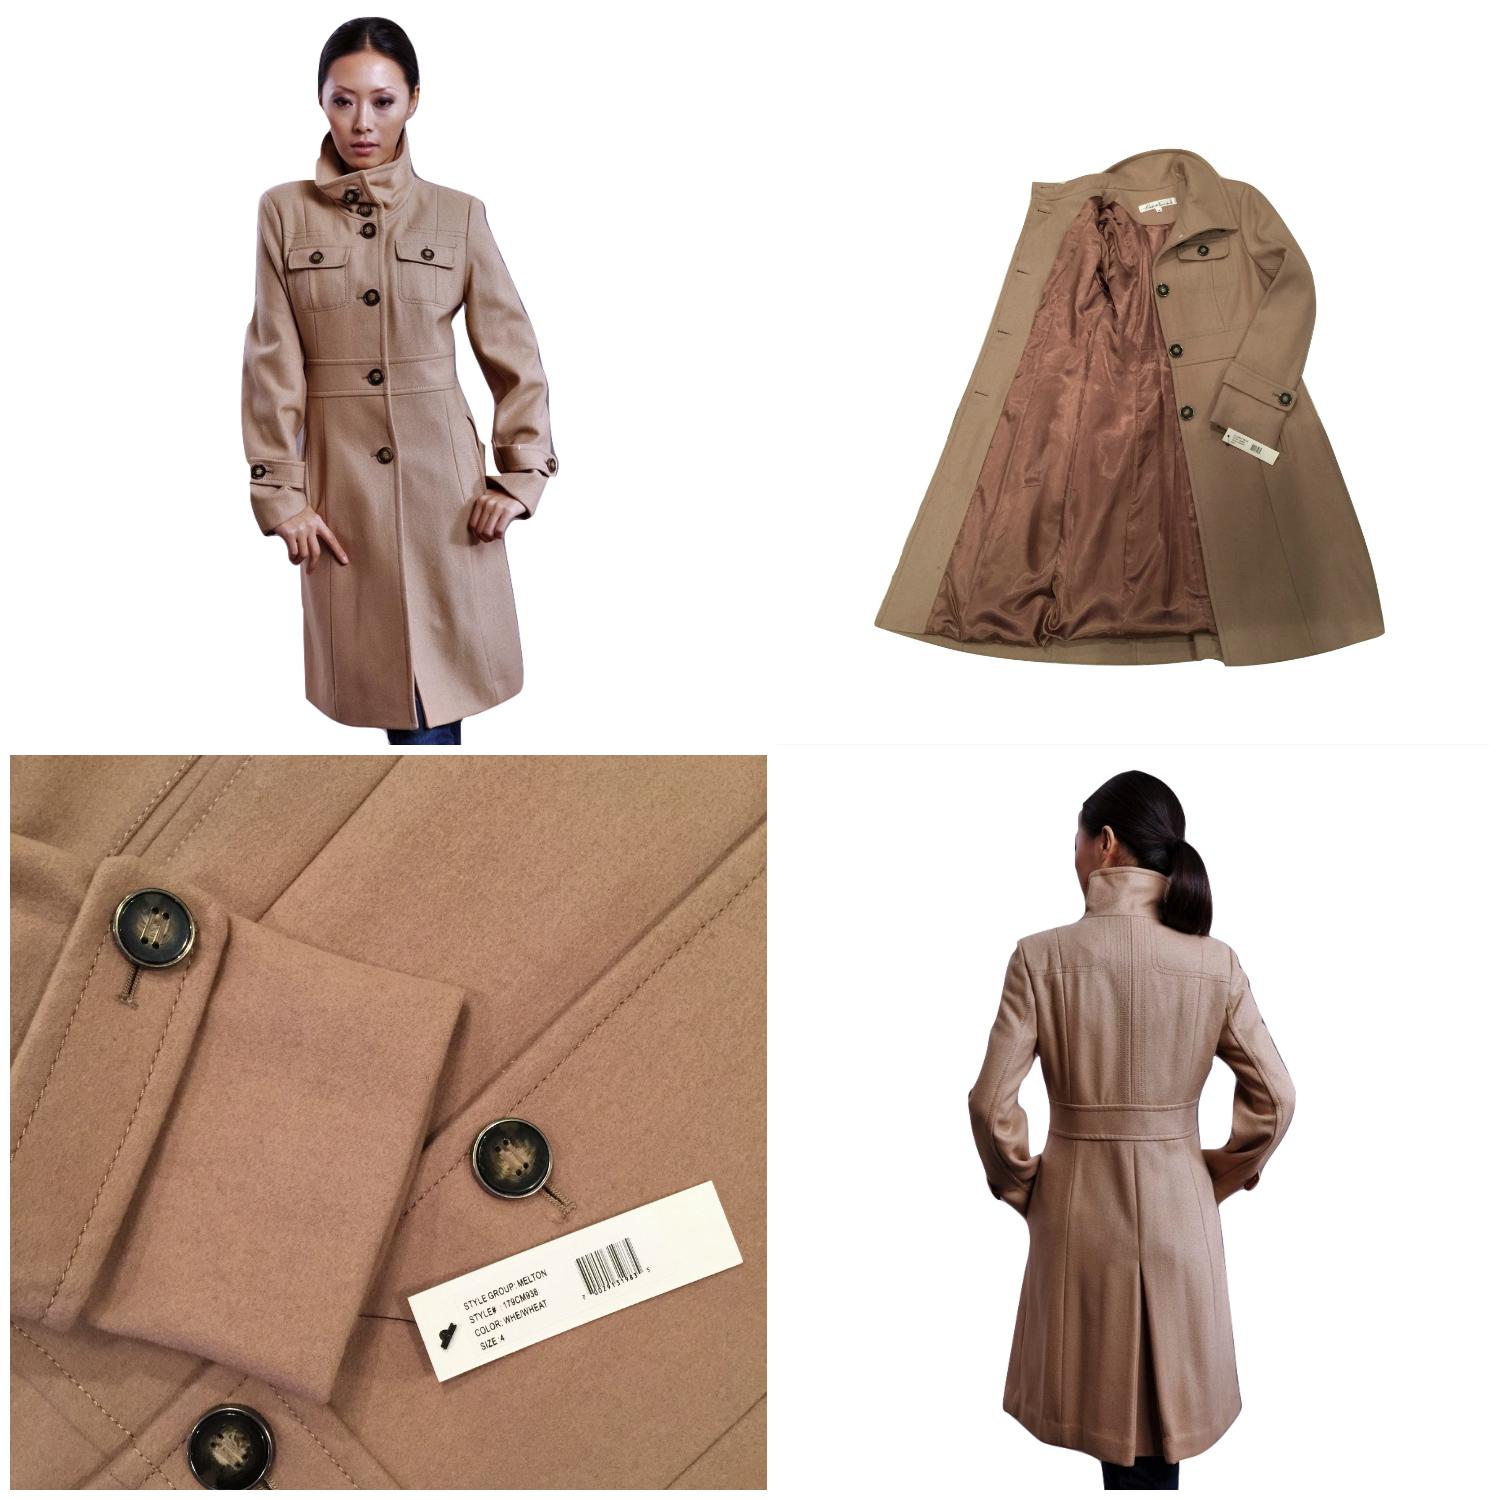 Kenneth Cole Coat
Brand New w/ Tags
Size: 2
* Stunning in Camel 